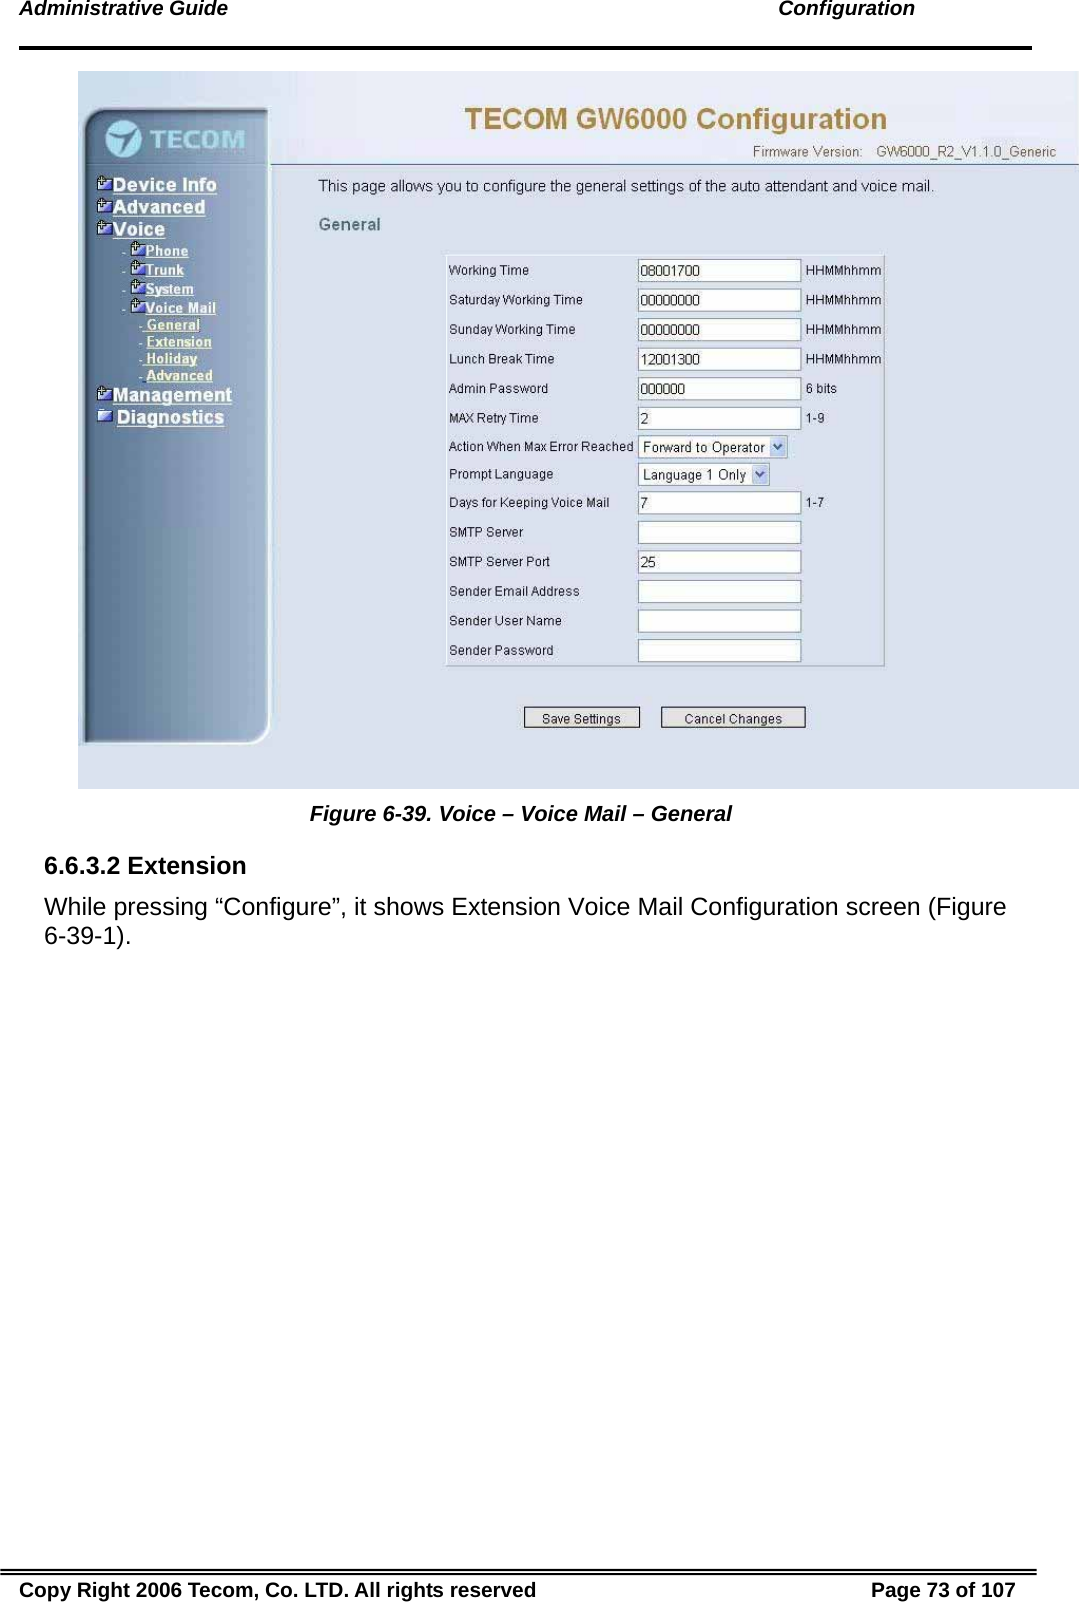 Administrative Guide                                                                                               Configuration  Figure 6-39. Voice – Voice Mail – General 6.6.3.2 Extension While pressing “Configure”, it shows Extension Voice Mail Configuration screen (Figure 6-39-1). Copy Right 2006 Tecom, Co. LTD. All rights reserved  Page 73 of 107 